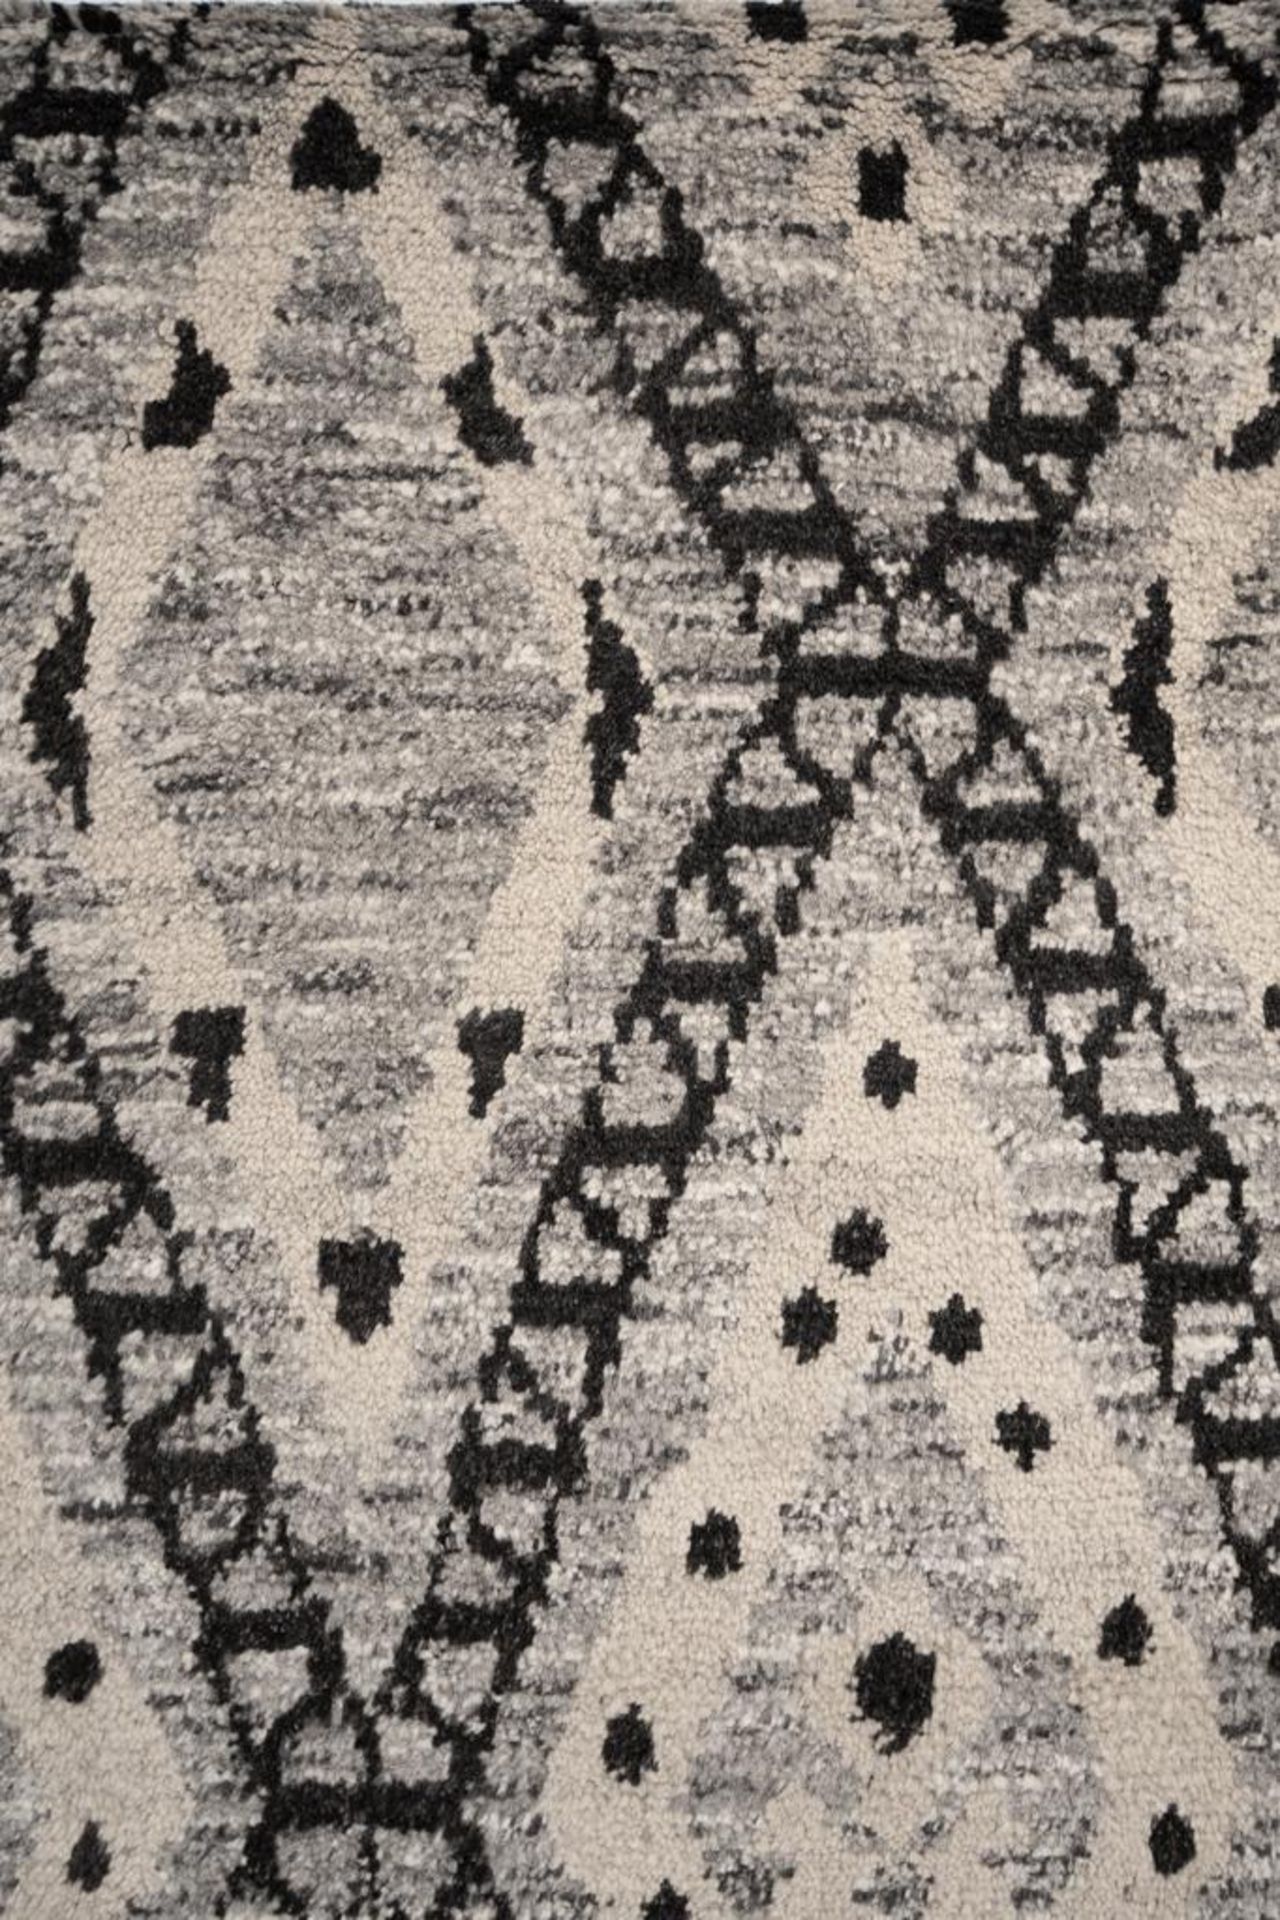 Brown Diamond Rug 203 x 249cm: A gorgeous Moroccan inspired floor rug. - Image 5 of 5